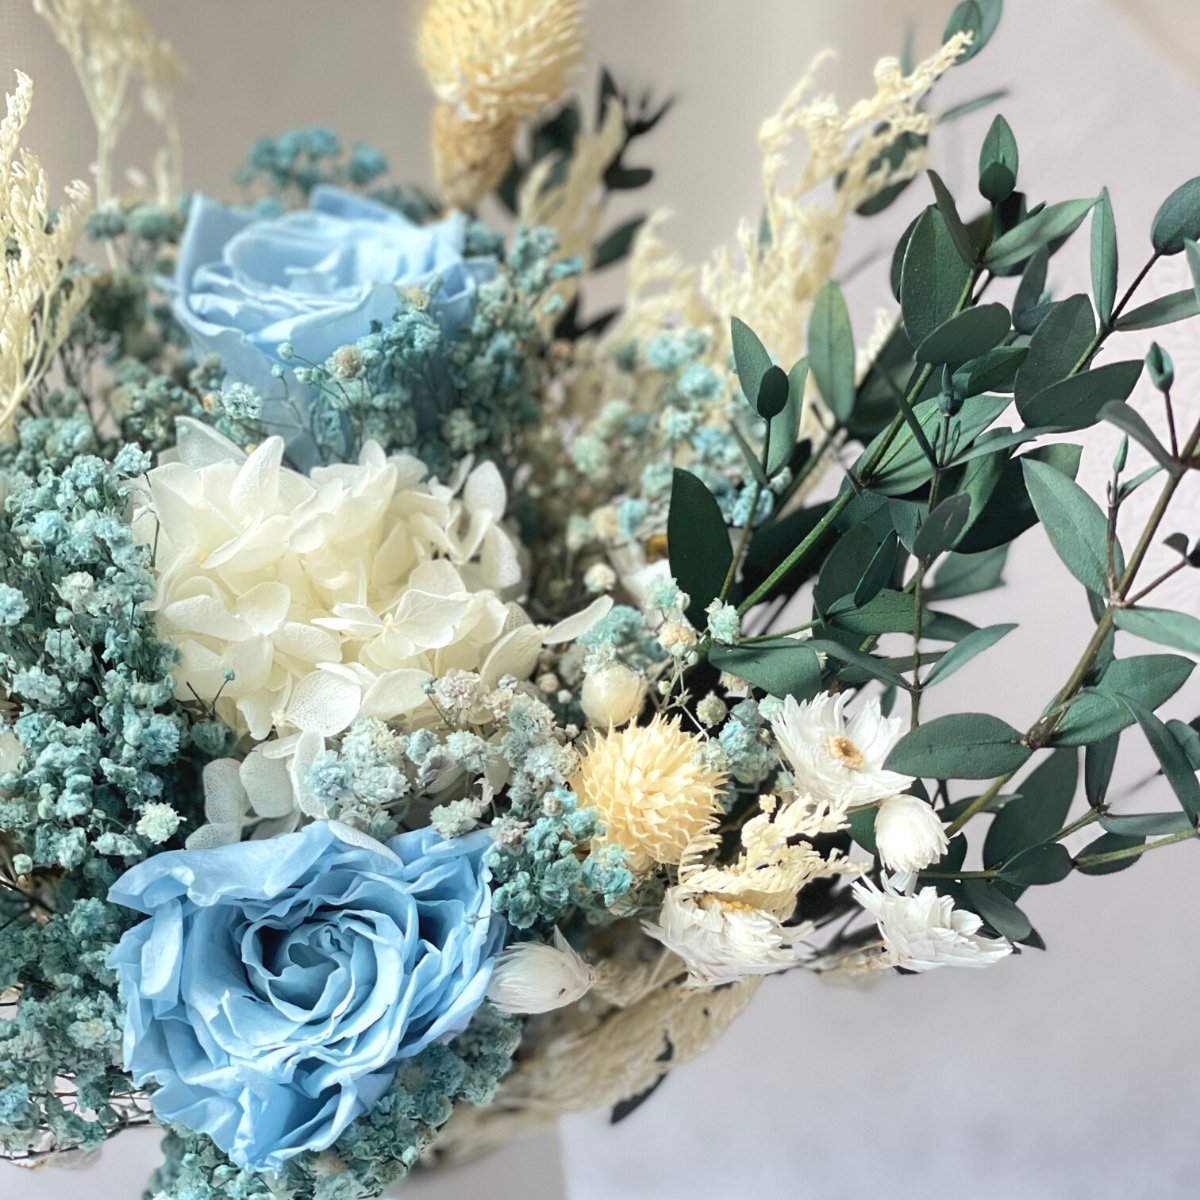 Fumiko, Blue - ふみこ- Japanese Preserved Flower Arrangement - Flower - Preserved Flowers & Fresh Flower Florist Gift Store